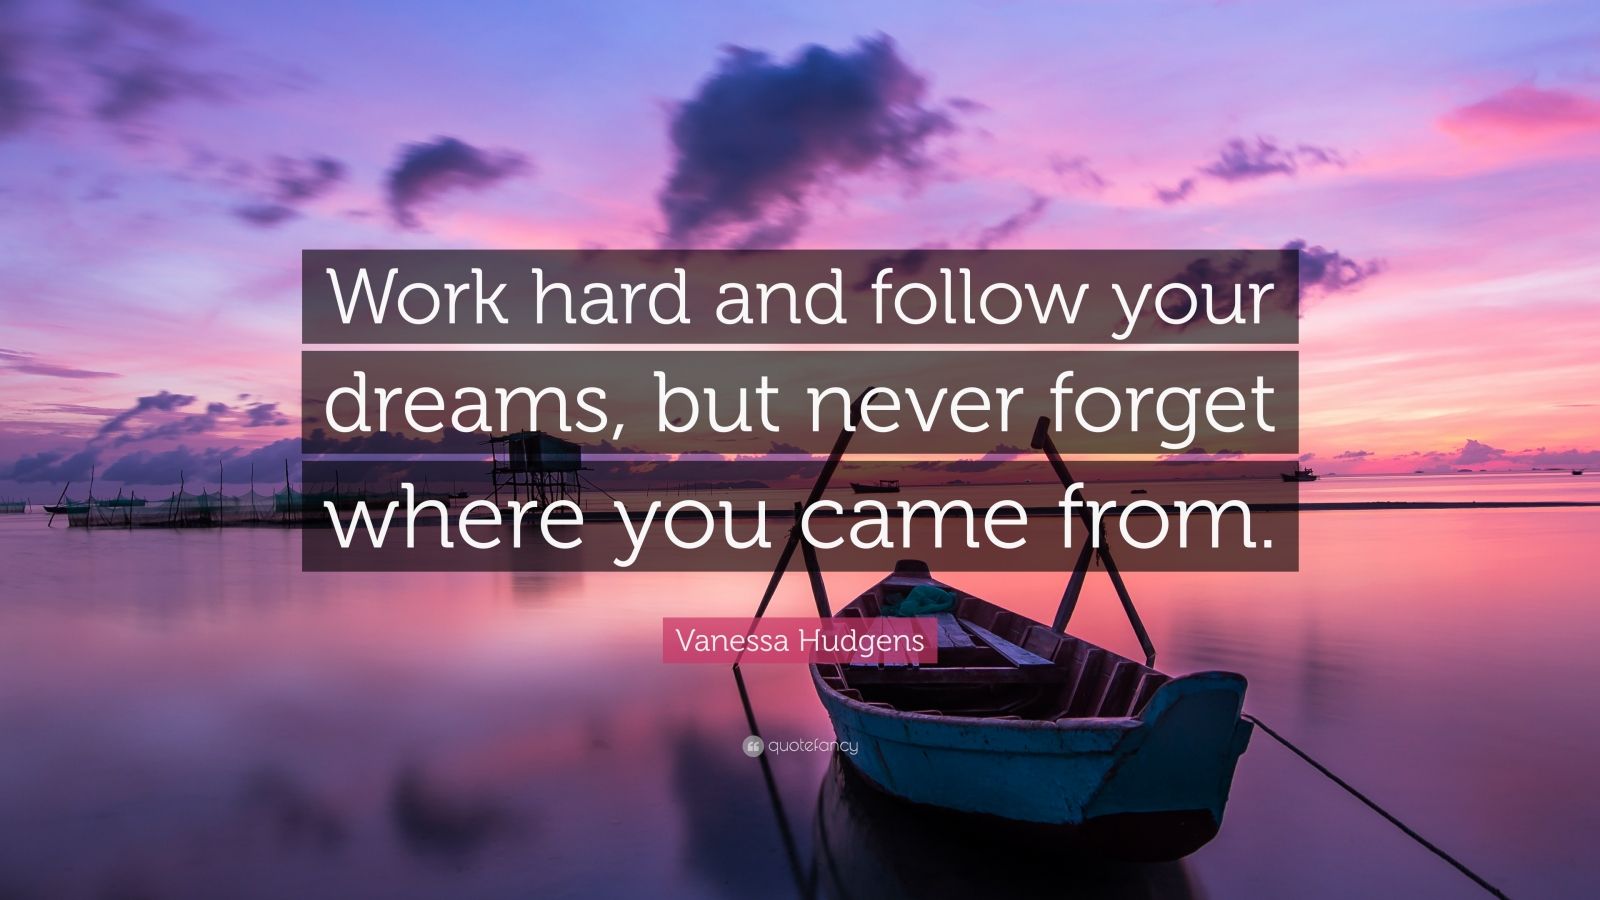 Vanessa Hudgens Quote: “Work hard and follow your dreams, but never ...